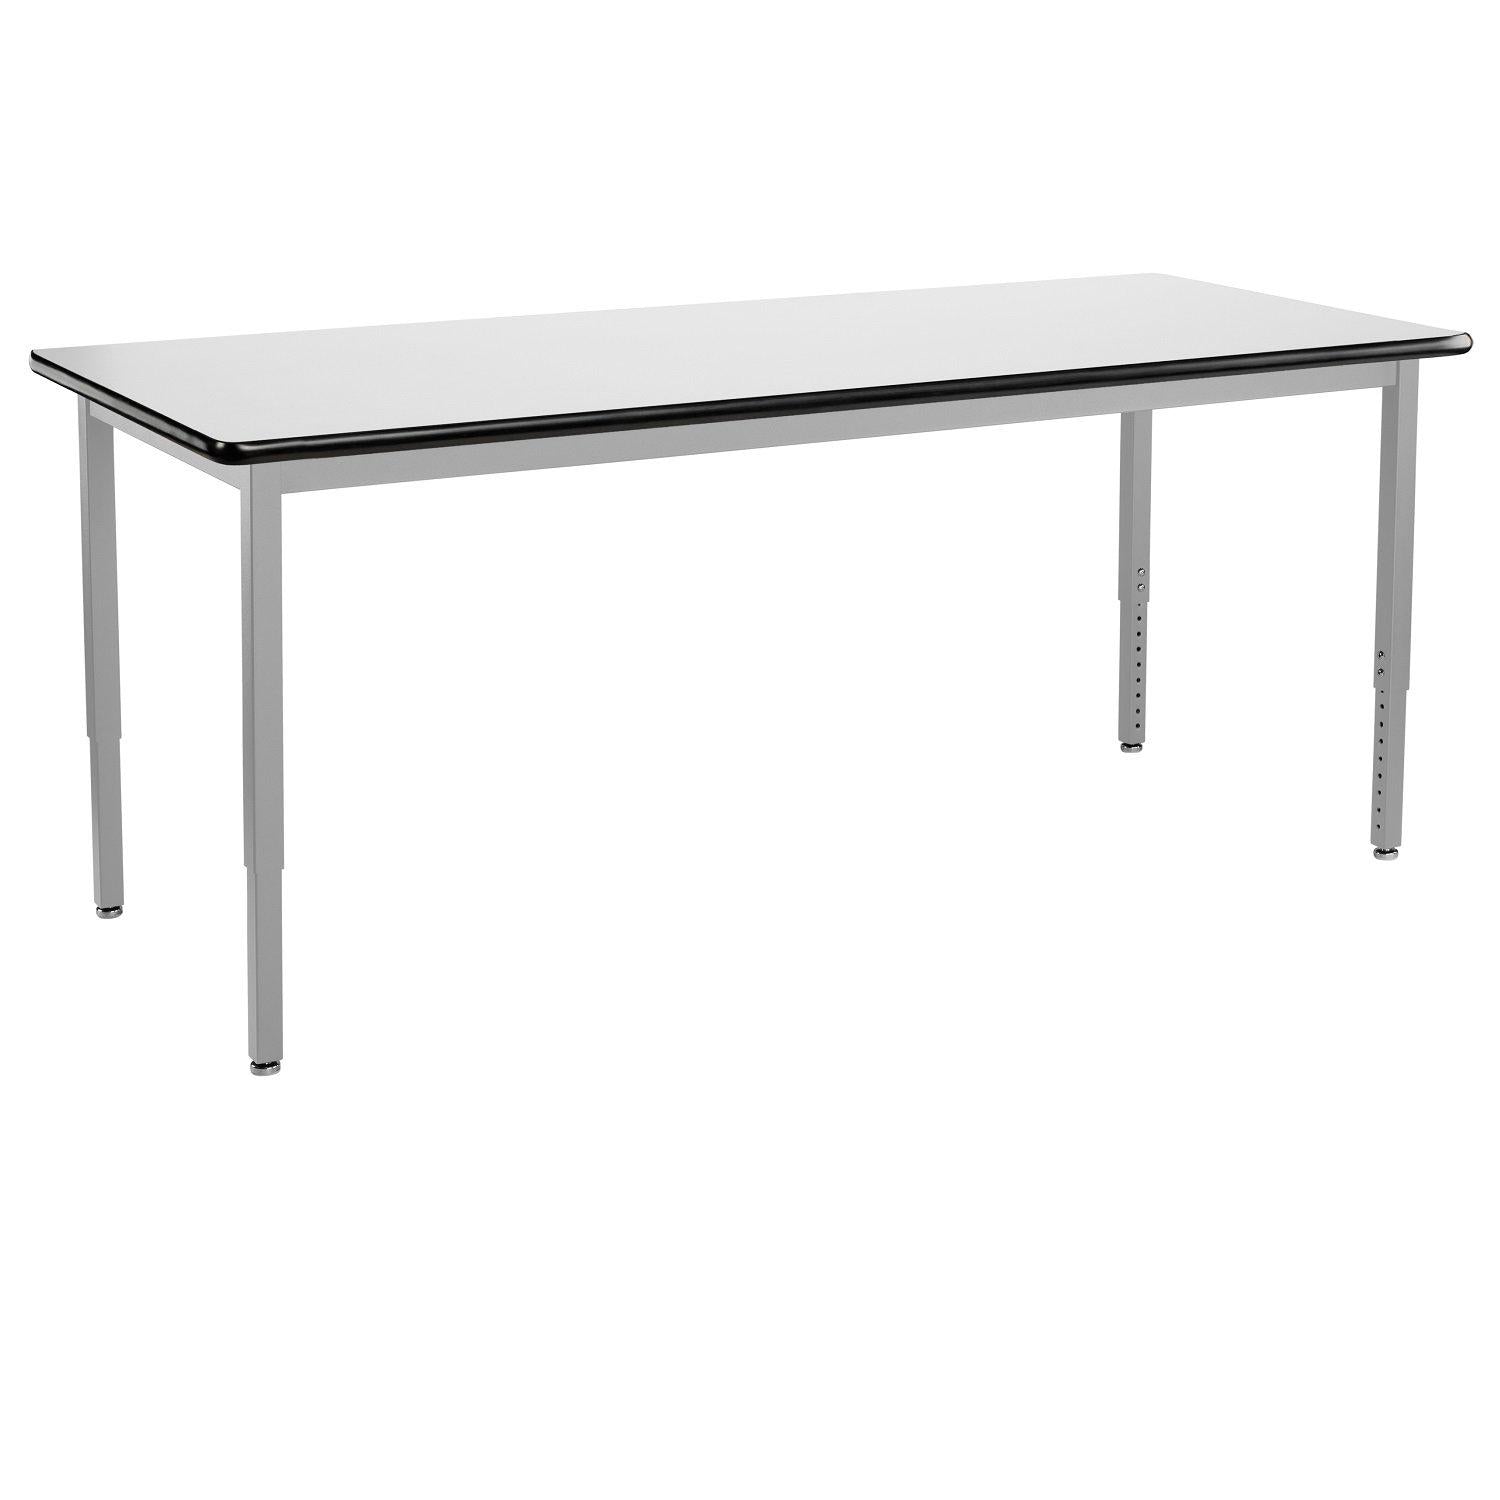 Heavy-Duty Height-Adjustable Utility Table, Soft Grey Frame, 24" x 96", Whiteboard High-Pressure Laminate Top